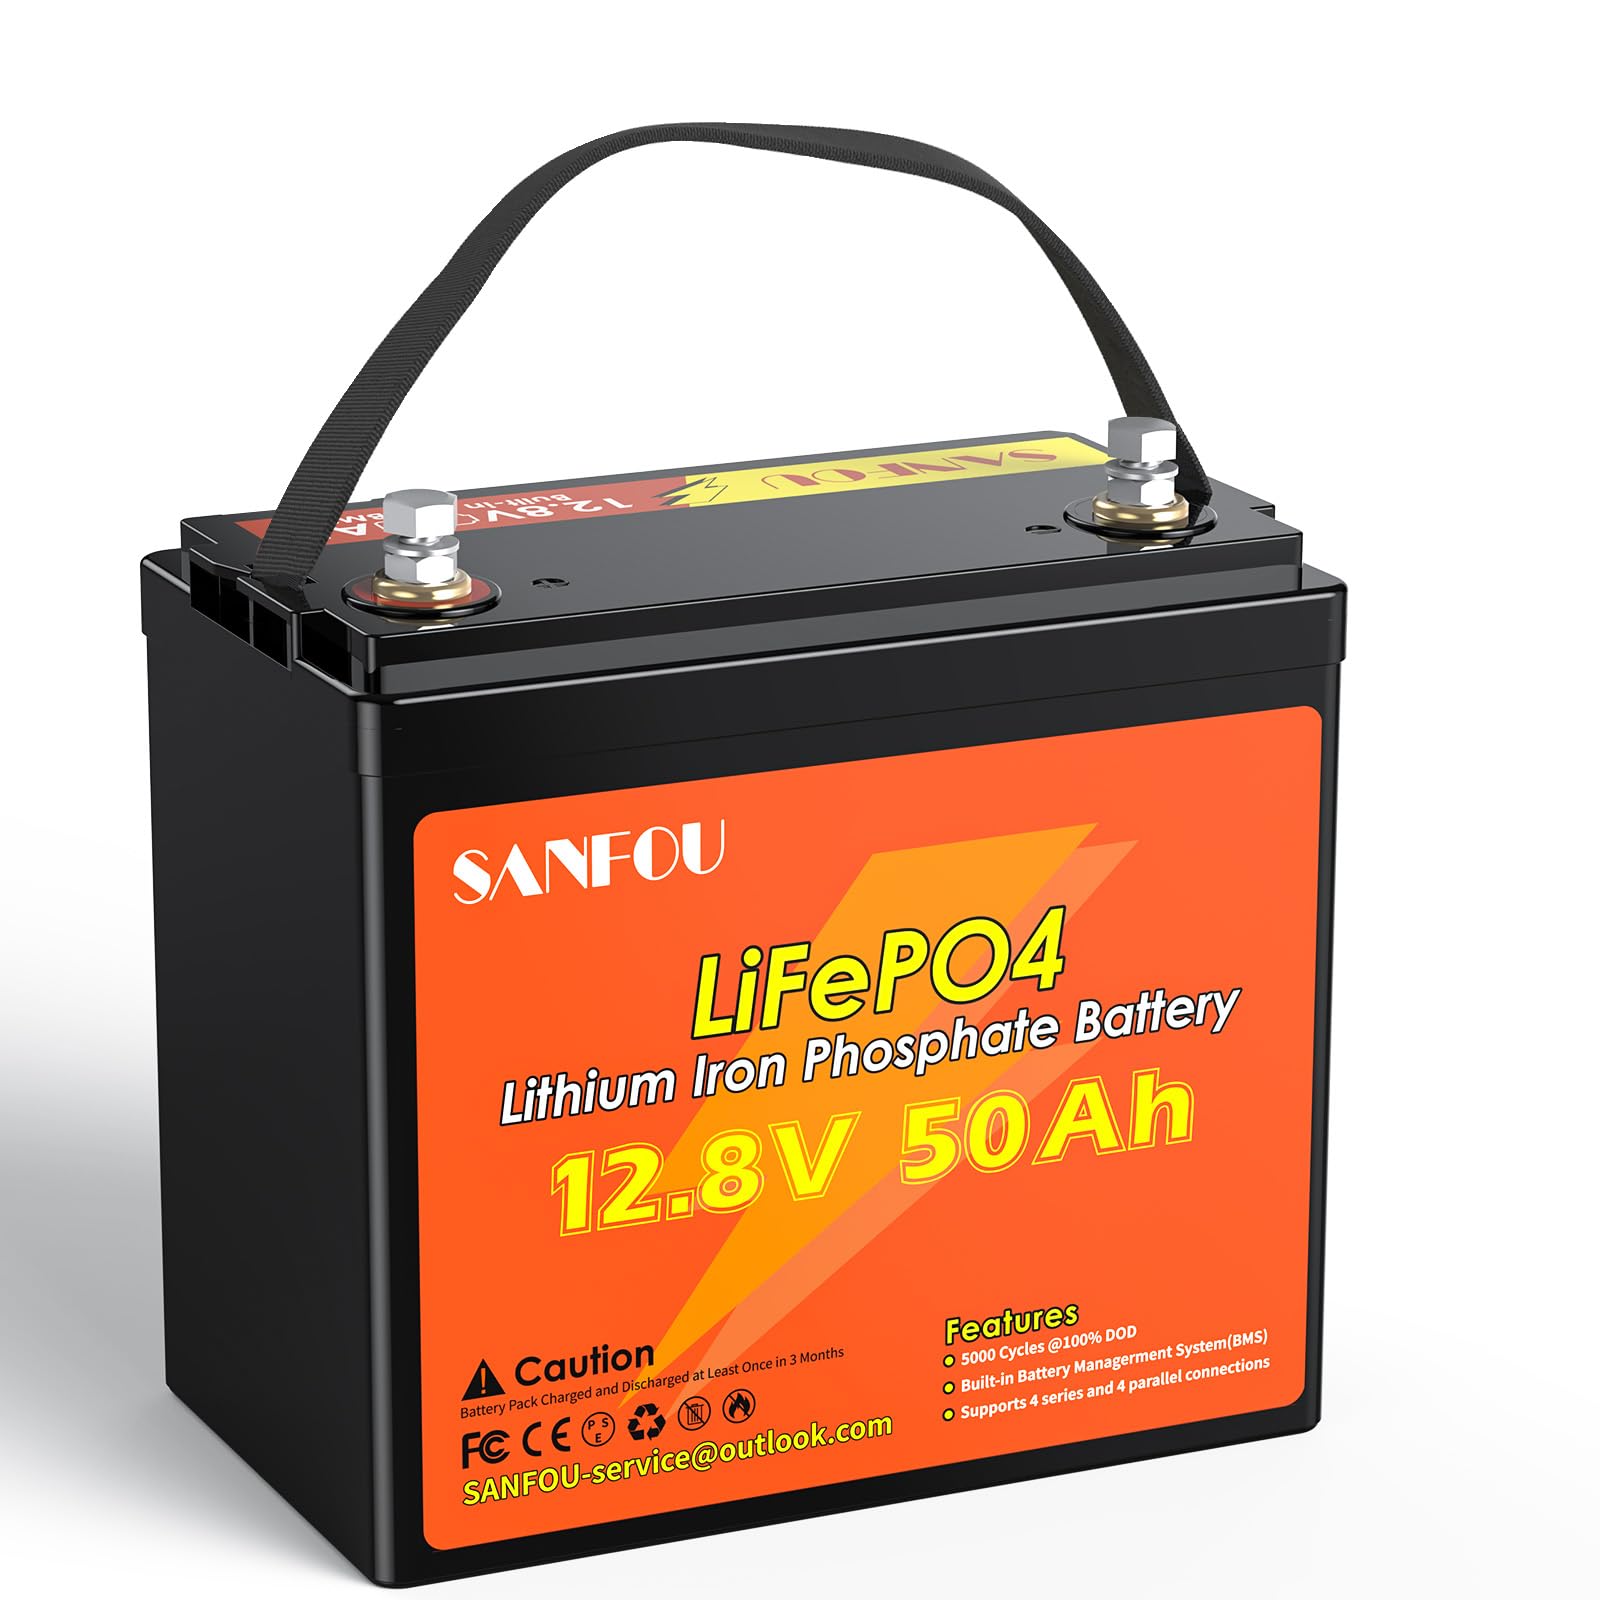 SANFOU 12V50Ah LiFePO4 Battery, 640Wh Lithium Battery with 50A BMS, 5000-15000 Times Autobatterien, Support 4S4P, Perfect as a Power Source for Motorhomes Camping von SANFOU